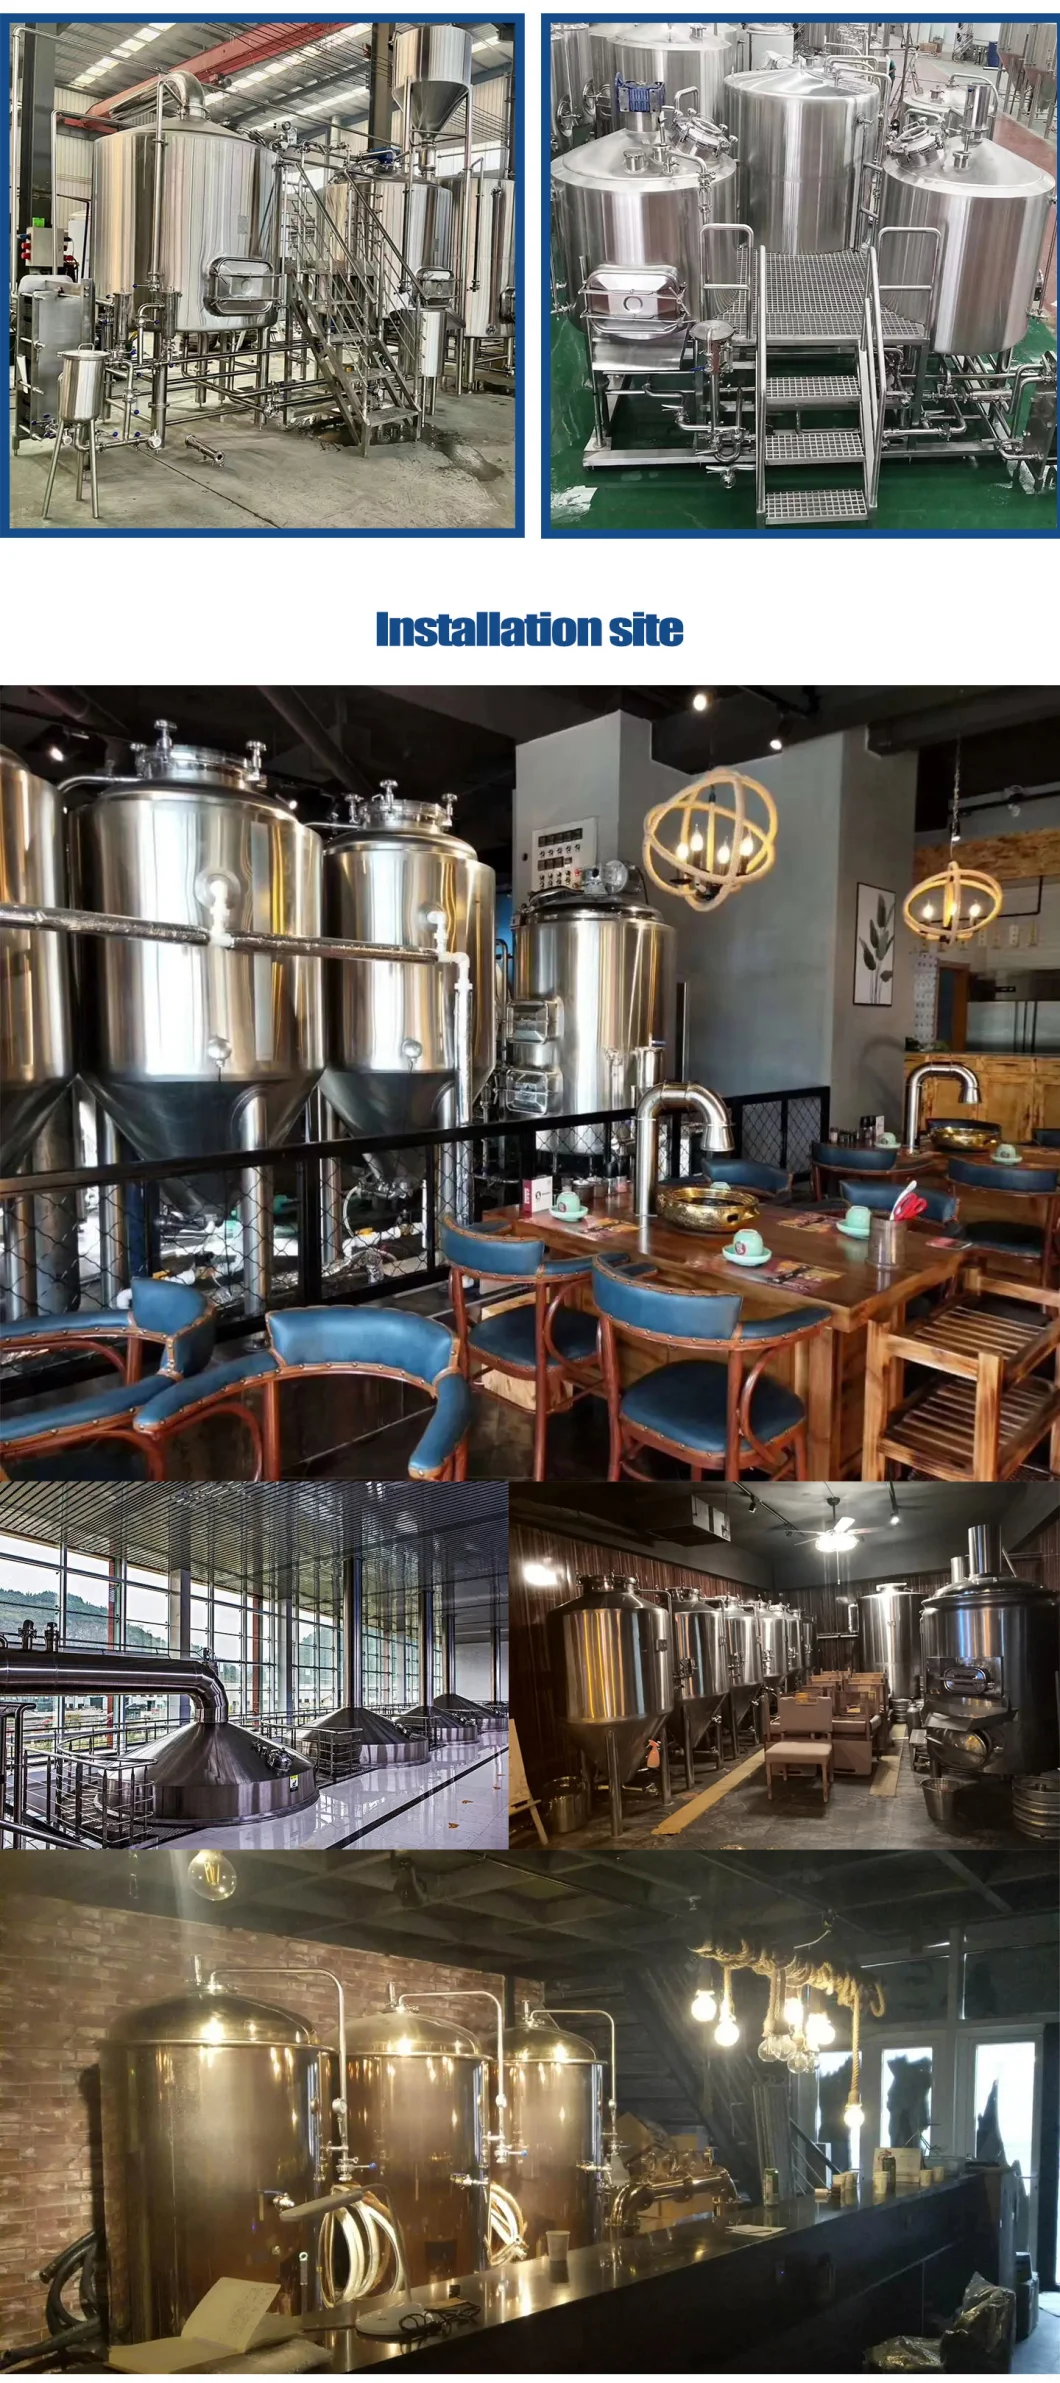 00L 200L 300L 500L 700L 1000L 1bbl 2bbl 3bbl 5bbl Industrial Commerical Restaurant Pub Home Micro Craft Brewery Brewing System Turnkey Beer Equipment